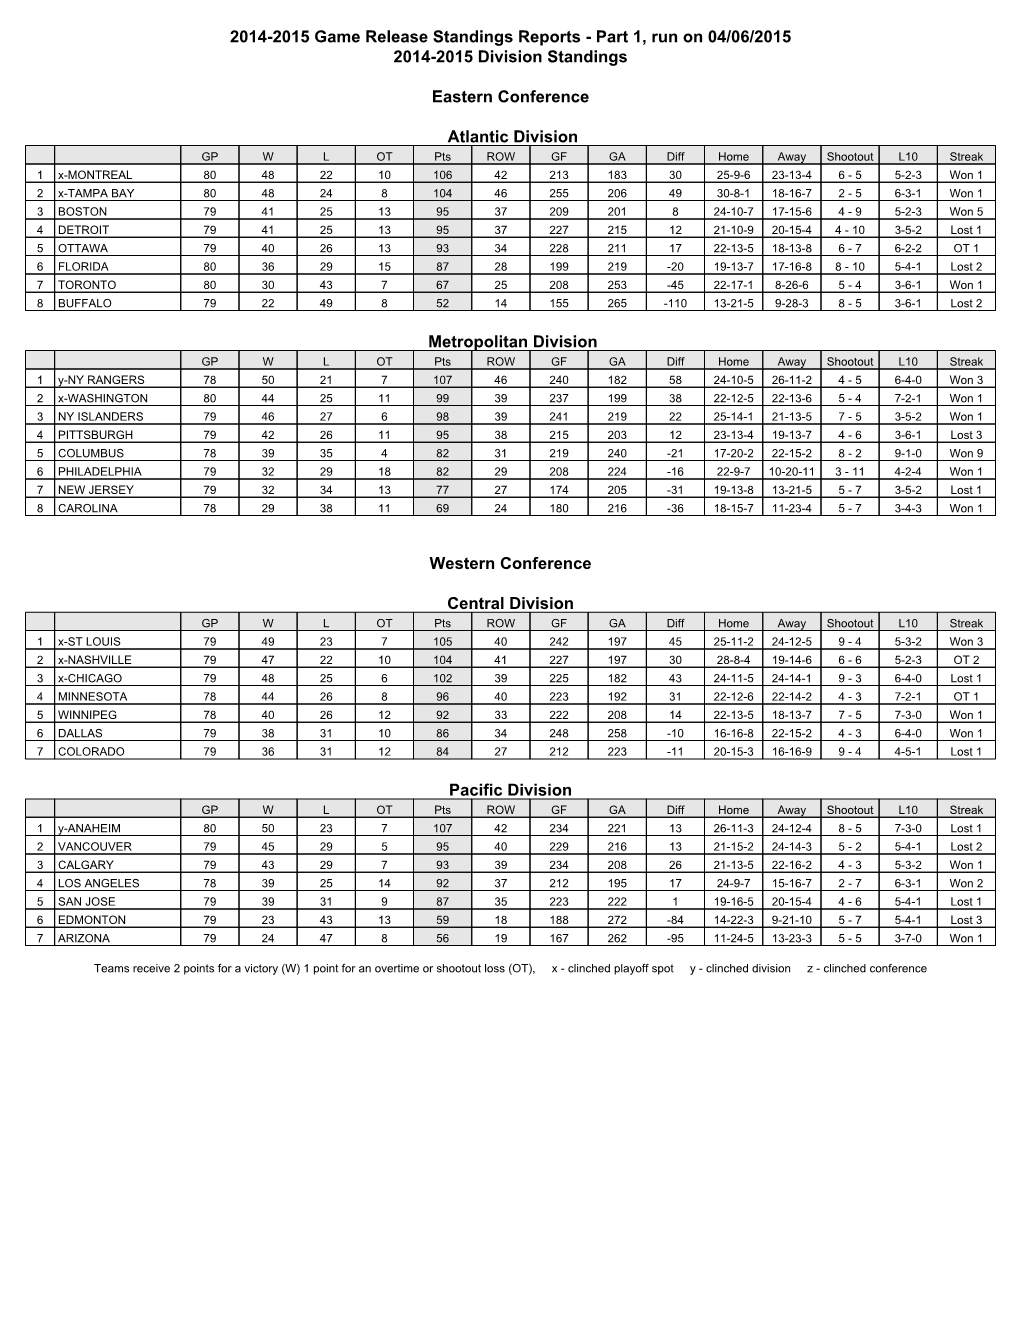 2014-2015 Game Release Standings Reports - Part 1, Run on 04/06/2015 2014-2015 Division Standings